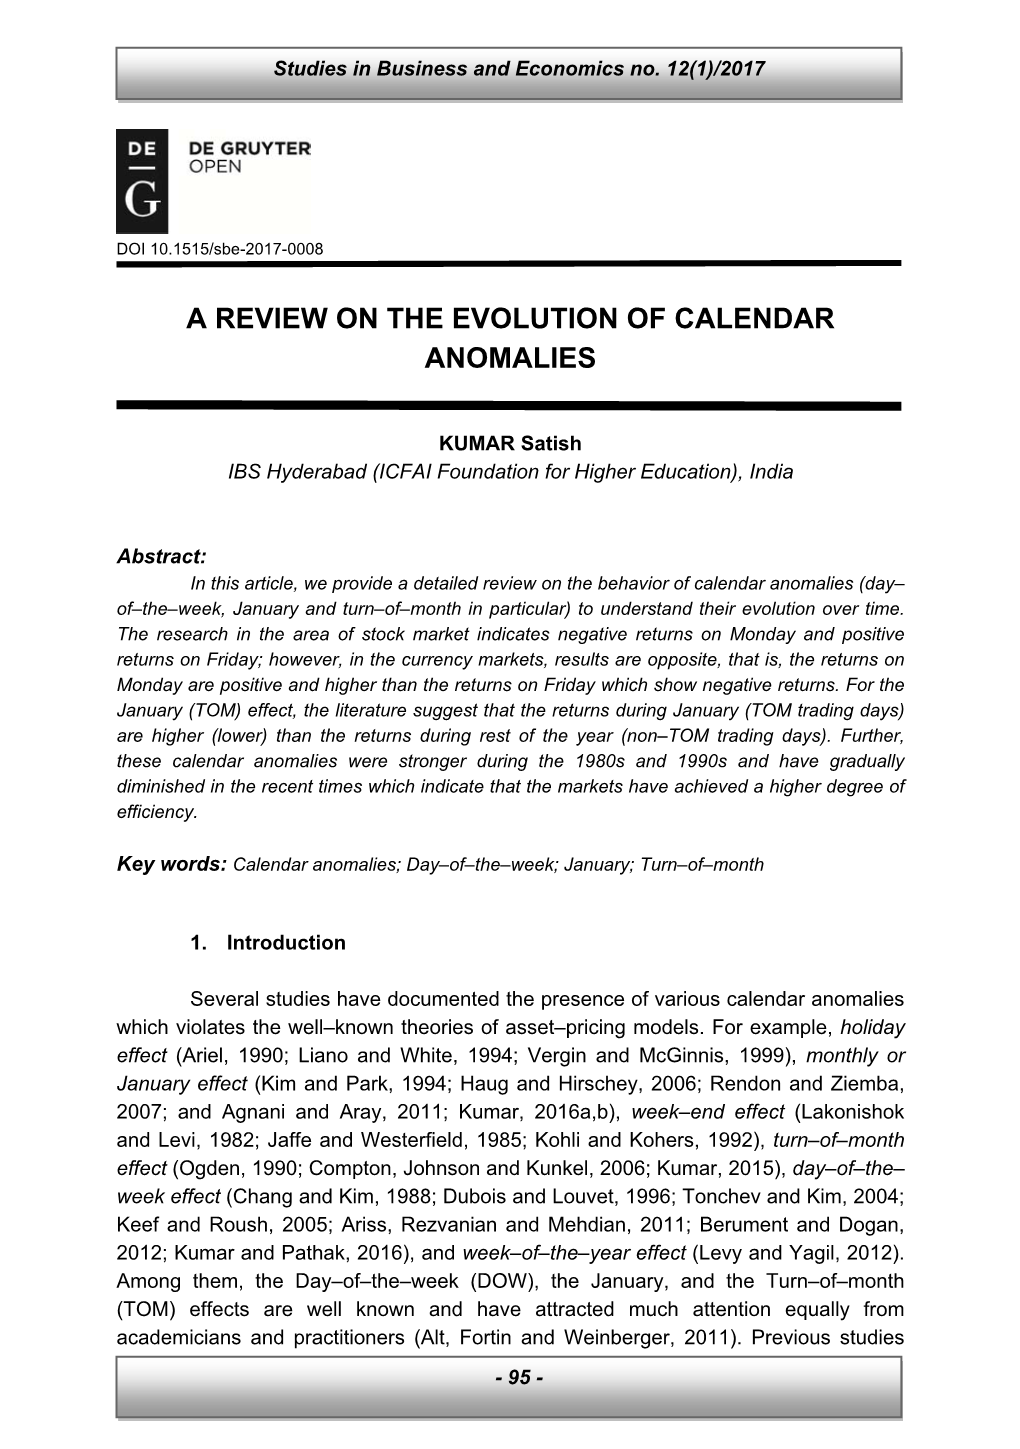 A Review on the Evolution of Calendar Anomalies